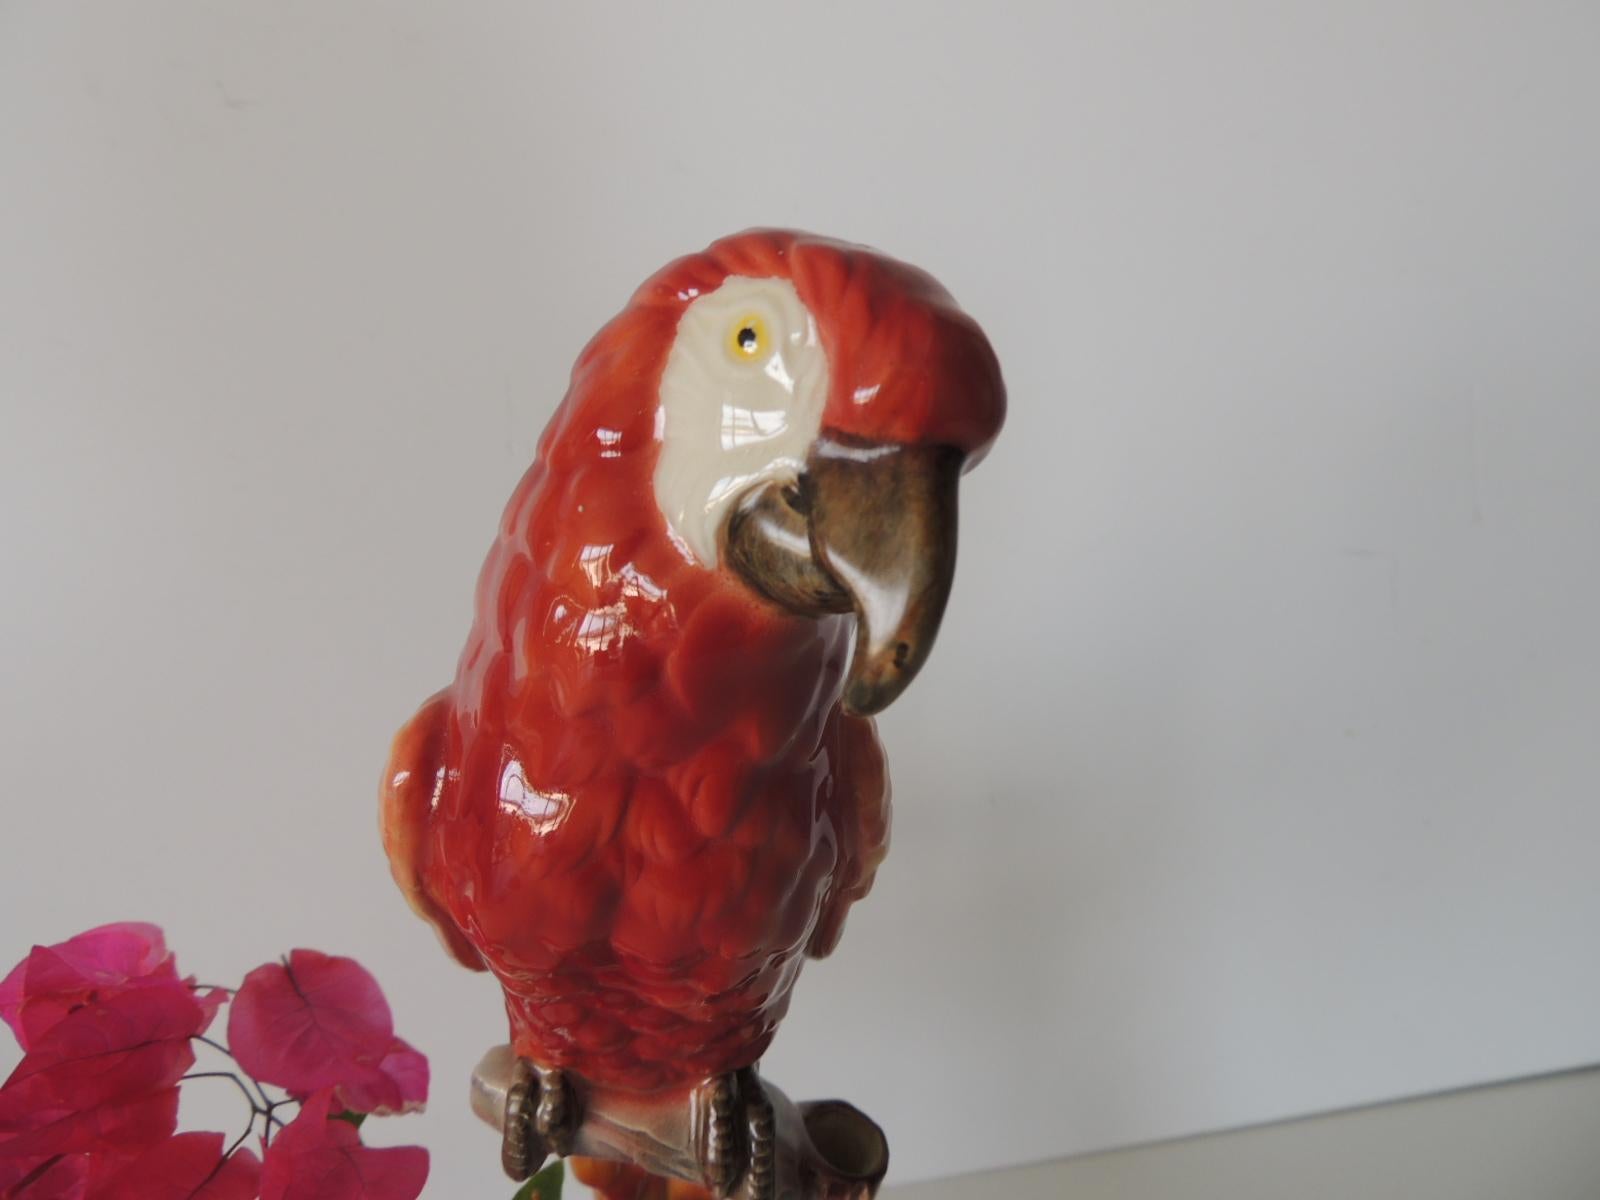 Bohemian Will George California Porcelain Art Pottery Macaw Parrot Figurine Vase, 1940's